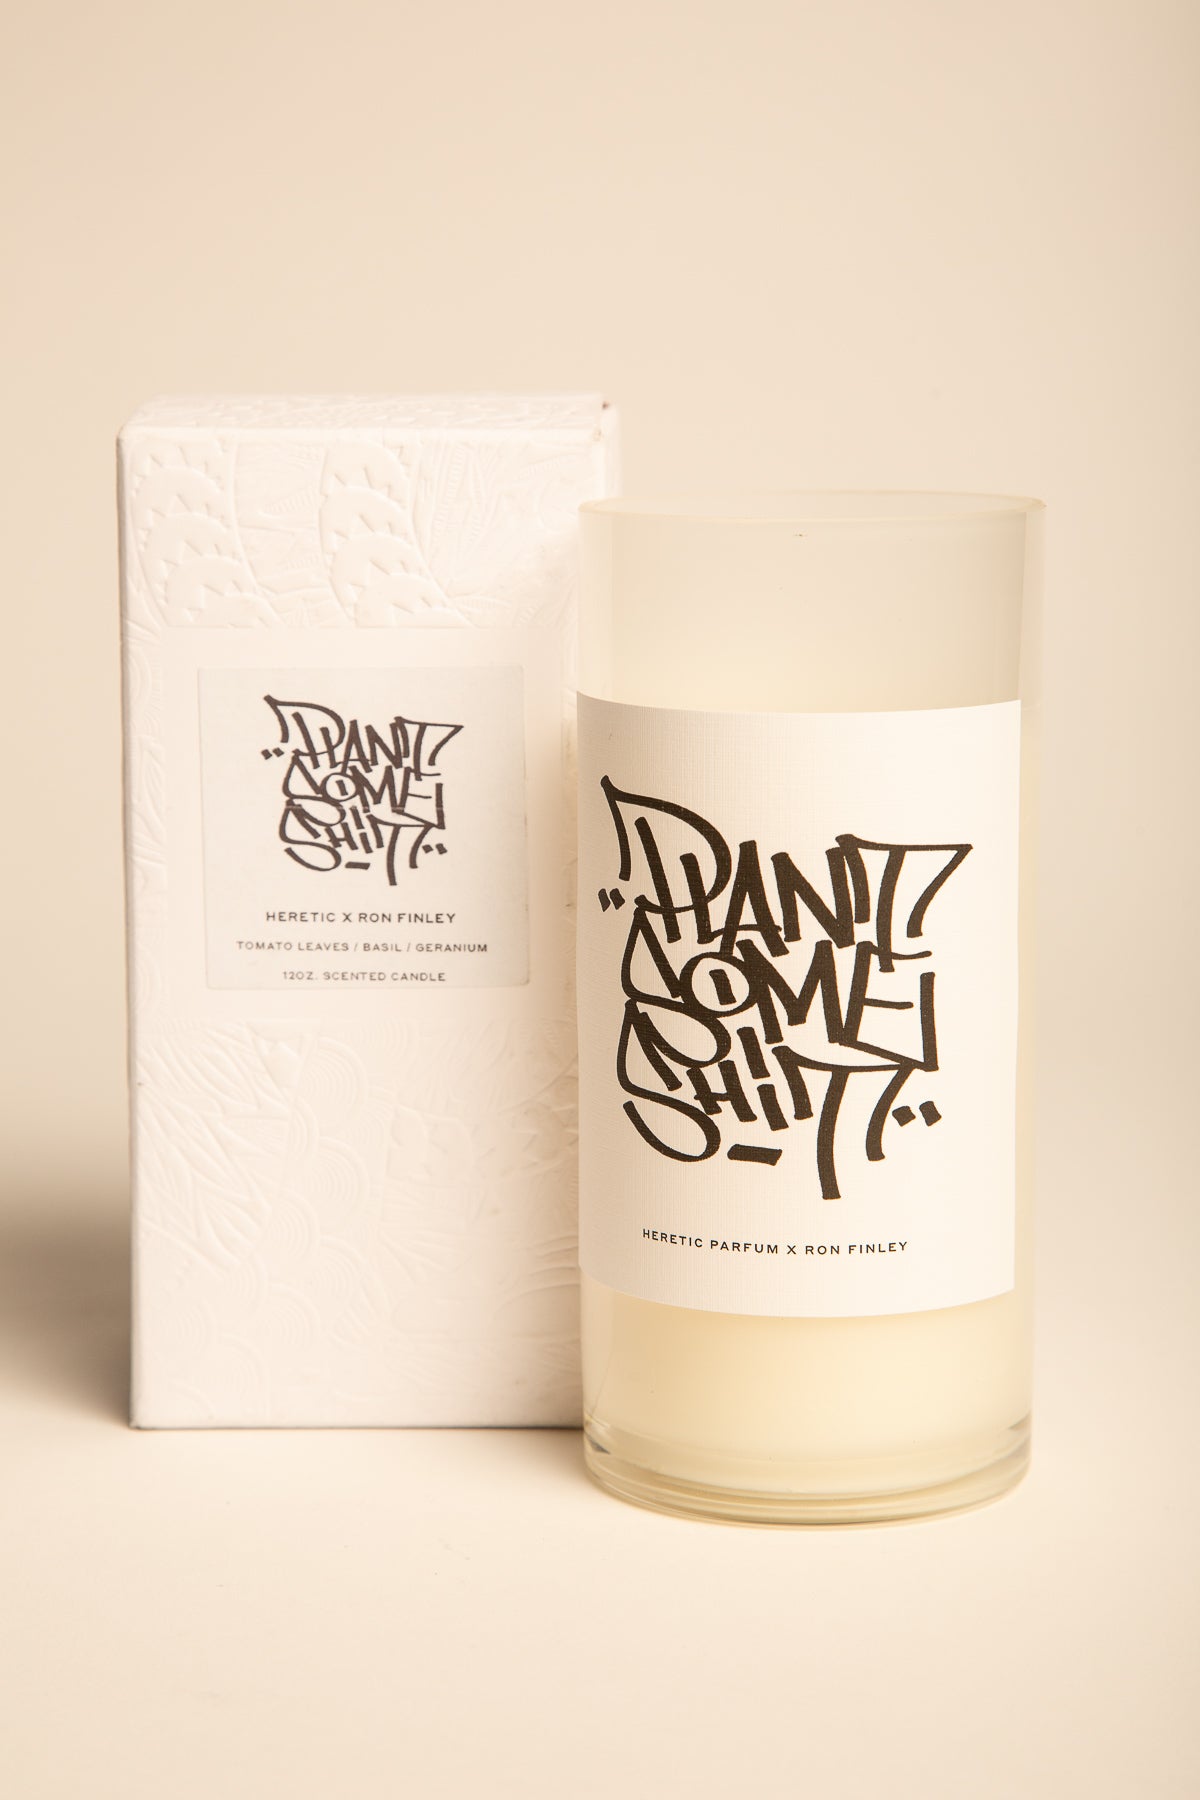 HERETIC | RON FINLEY PLANT SOME SHIT CANDLE